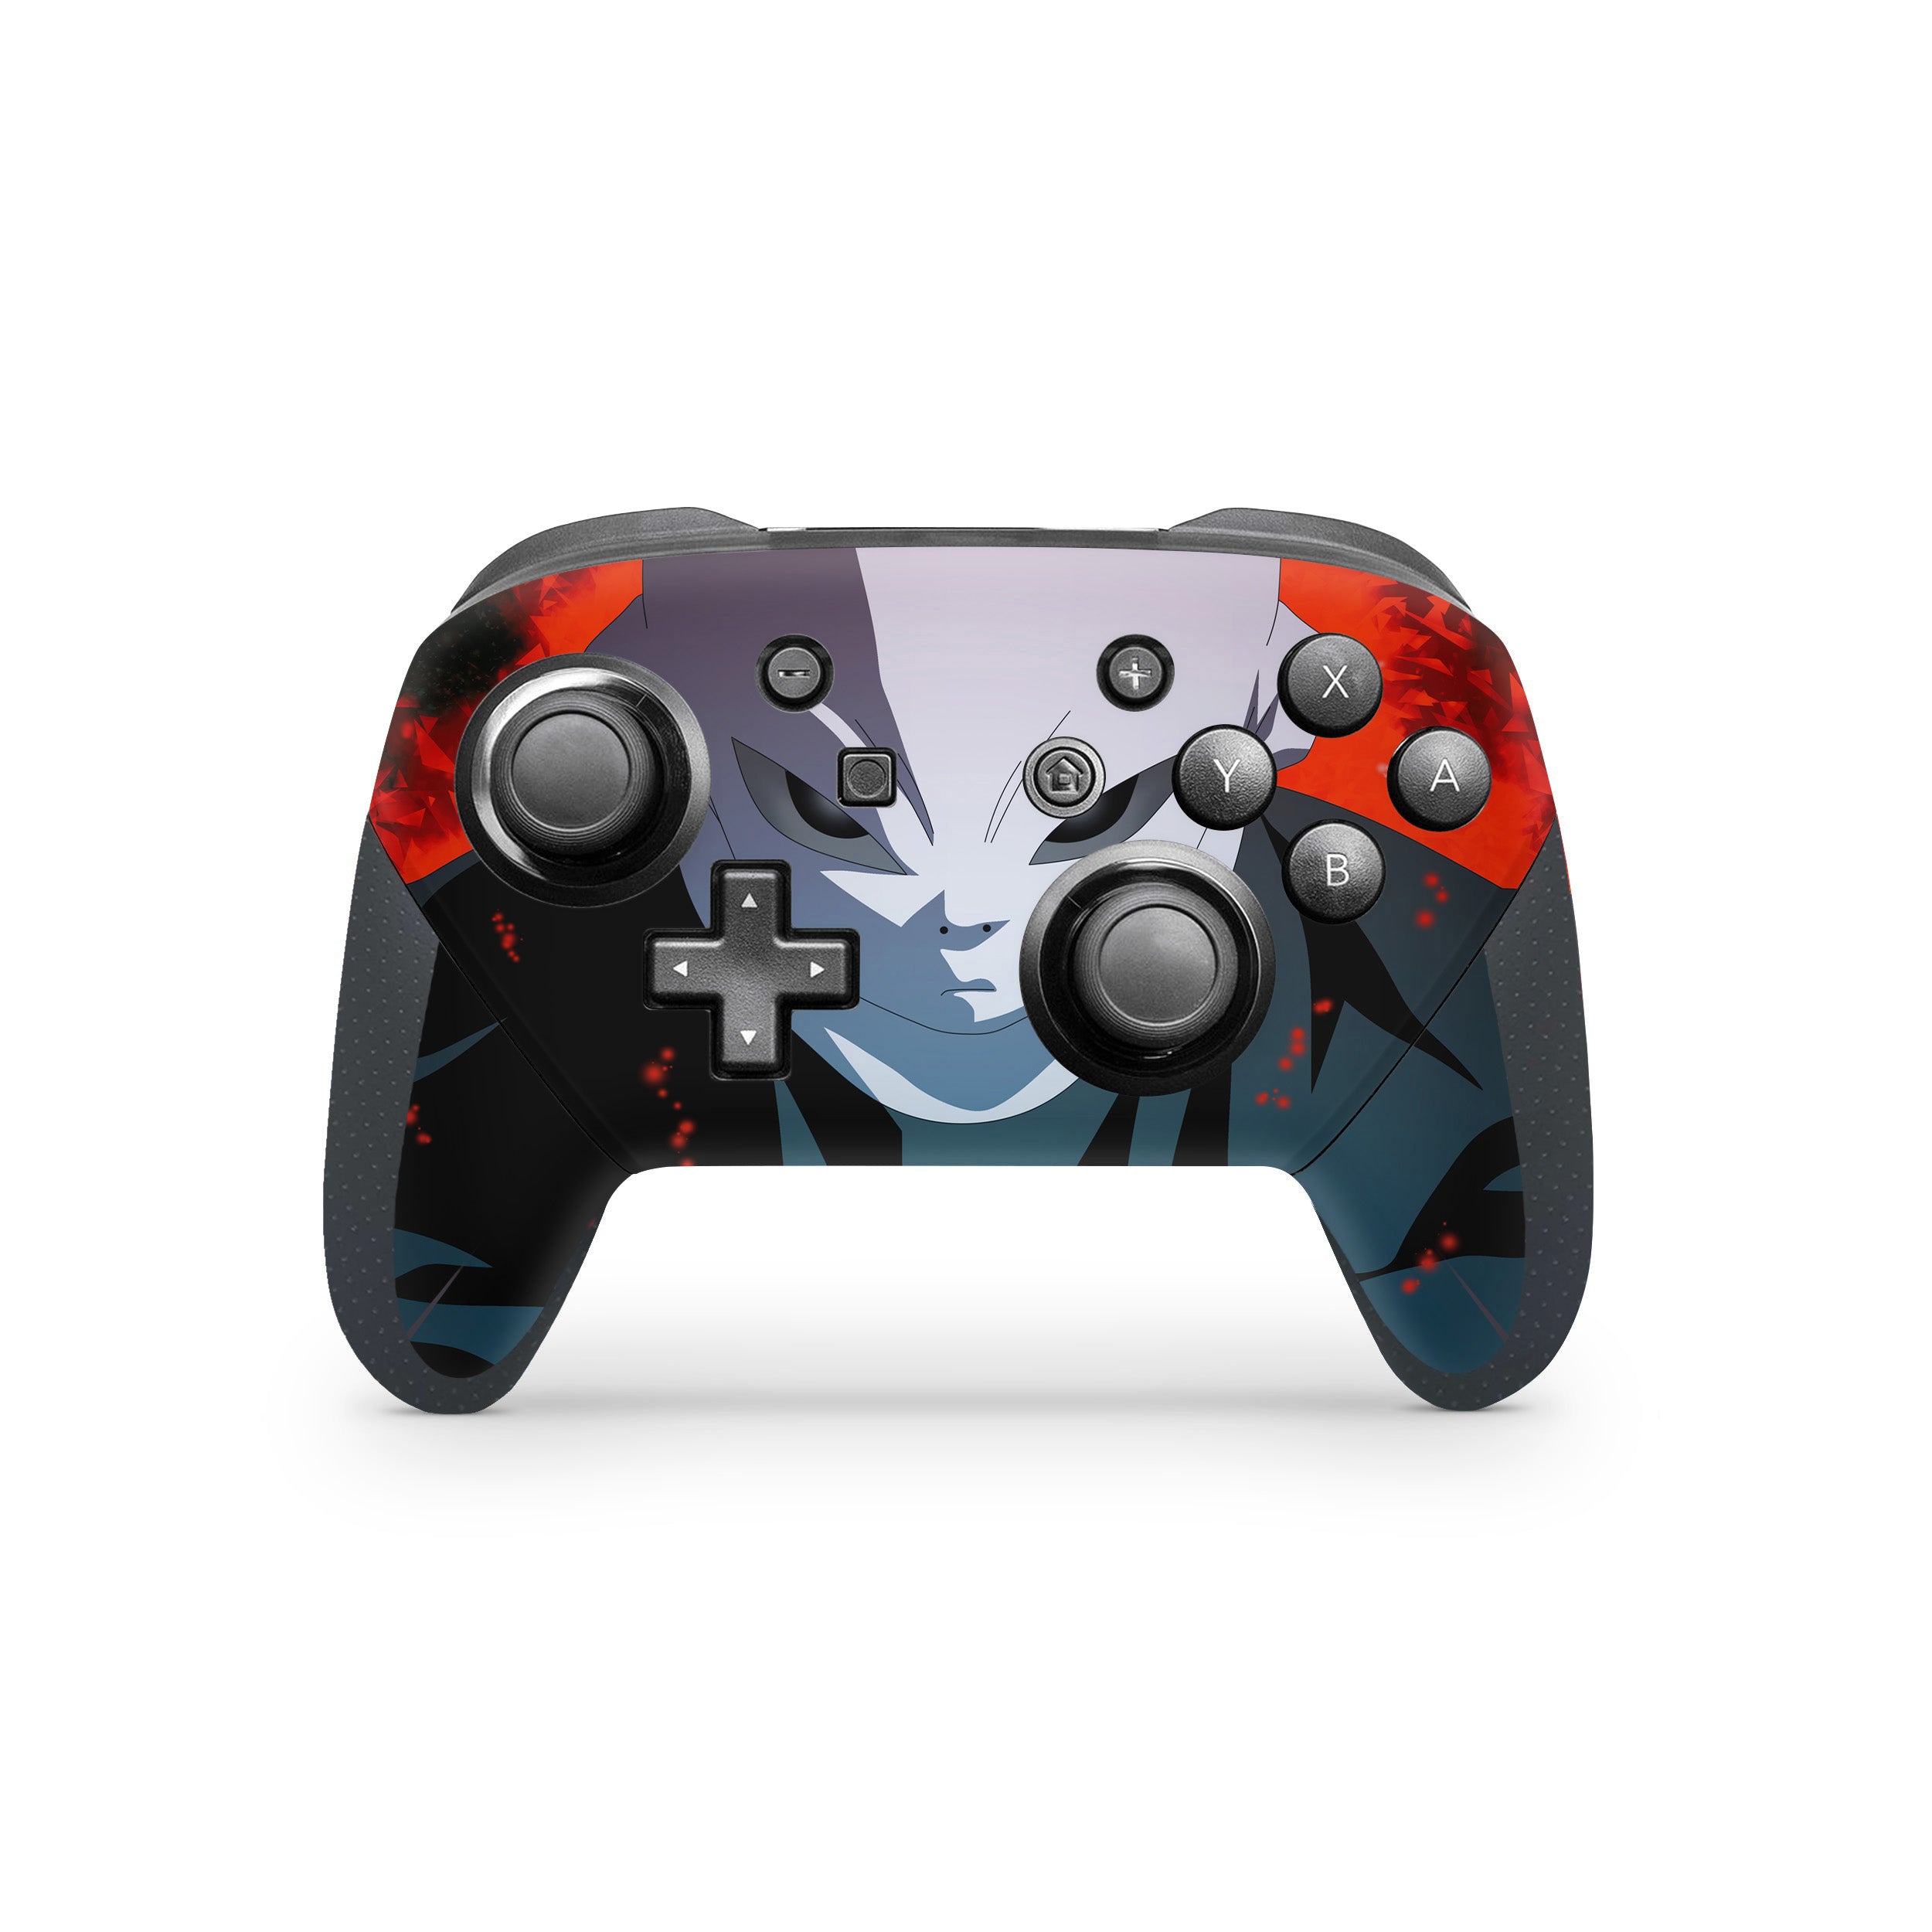 A video game skin featuring a Dragon Ball Super Jiren design for the Switch Pro Controller.